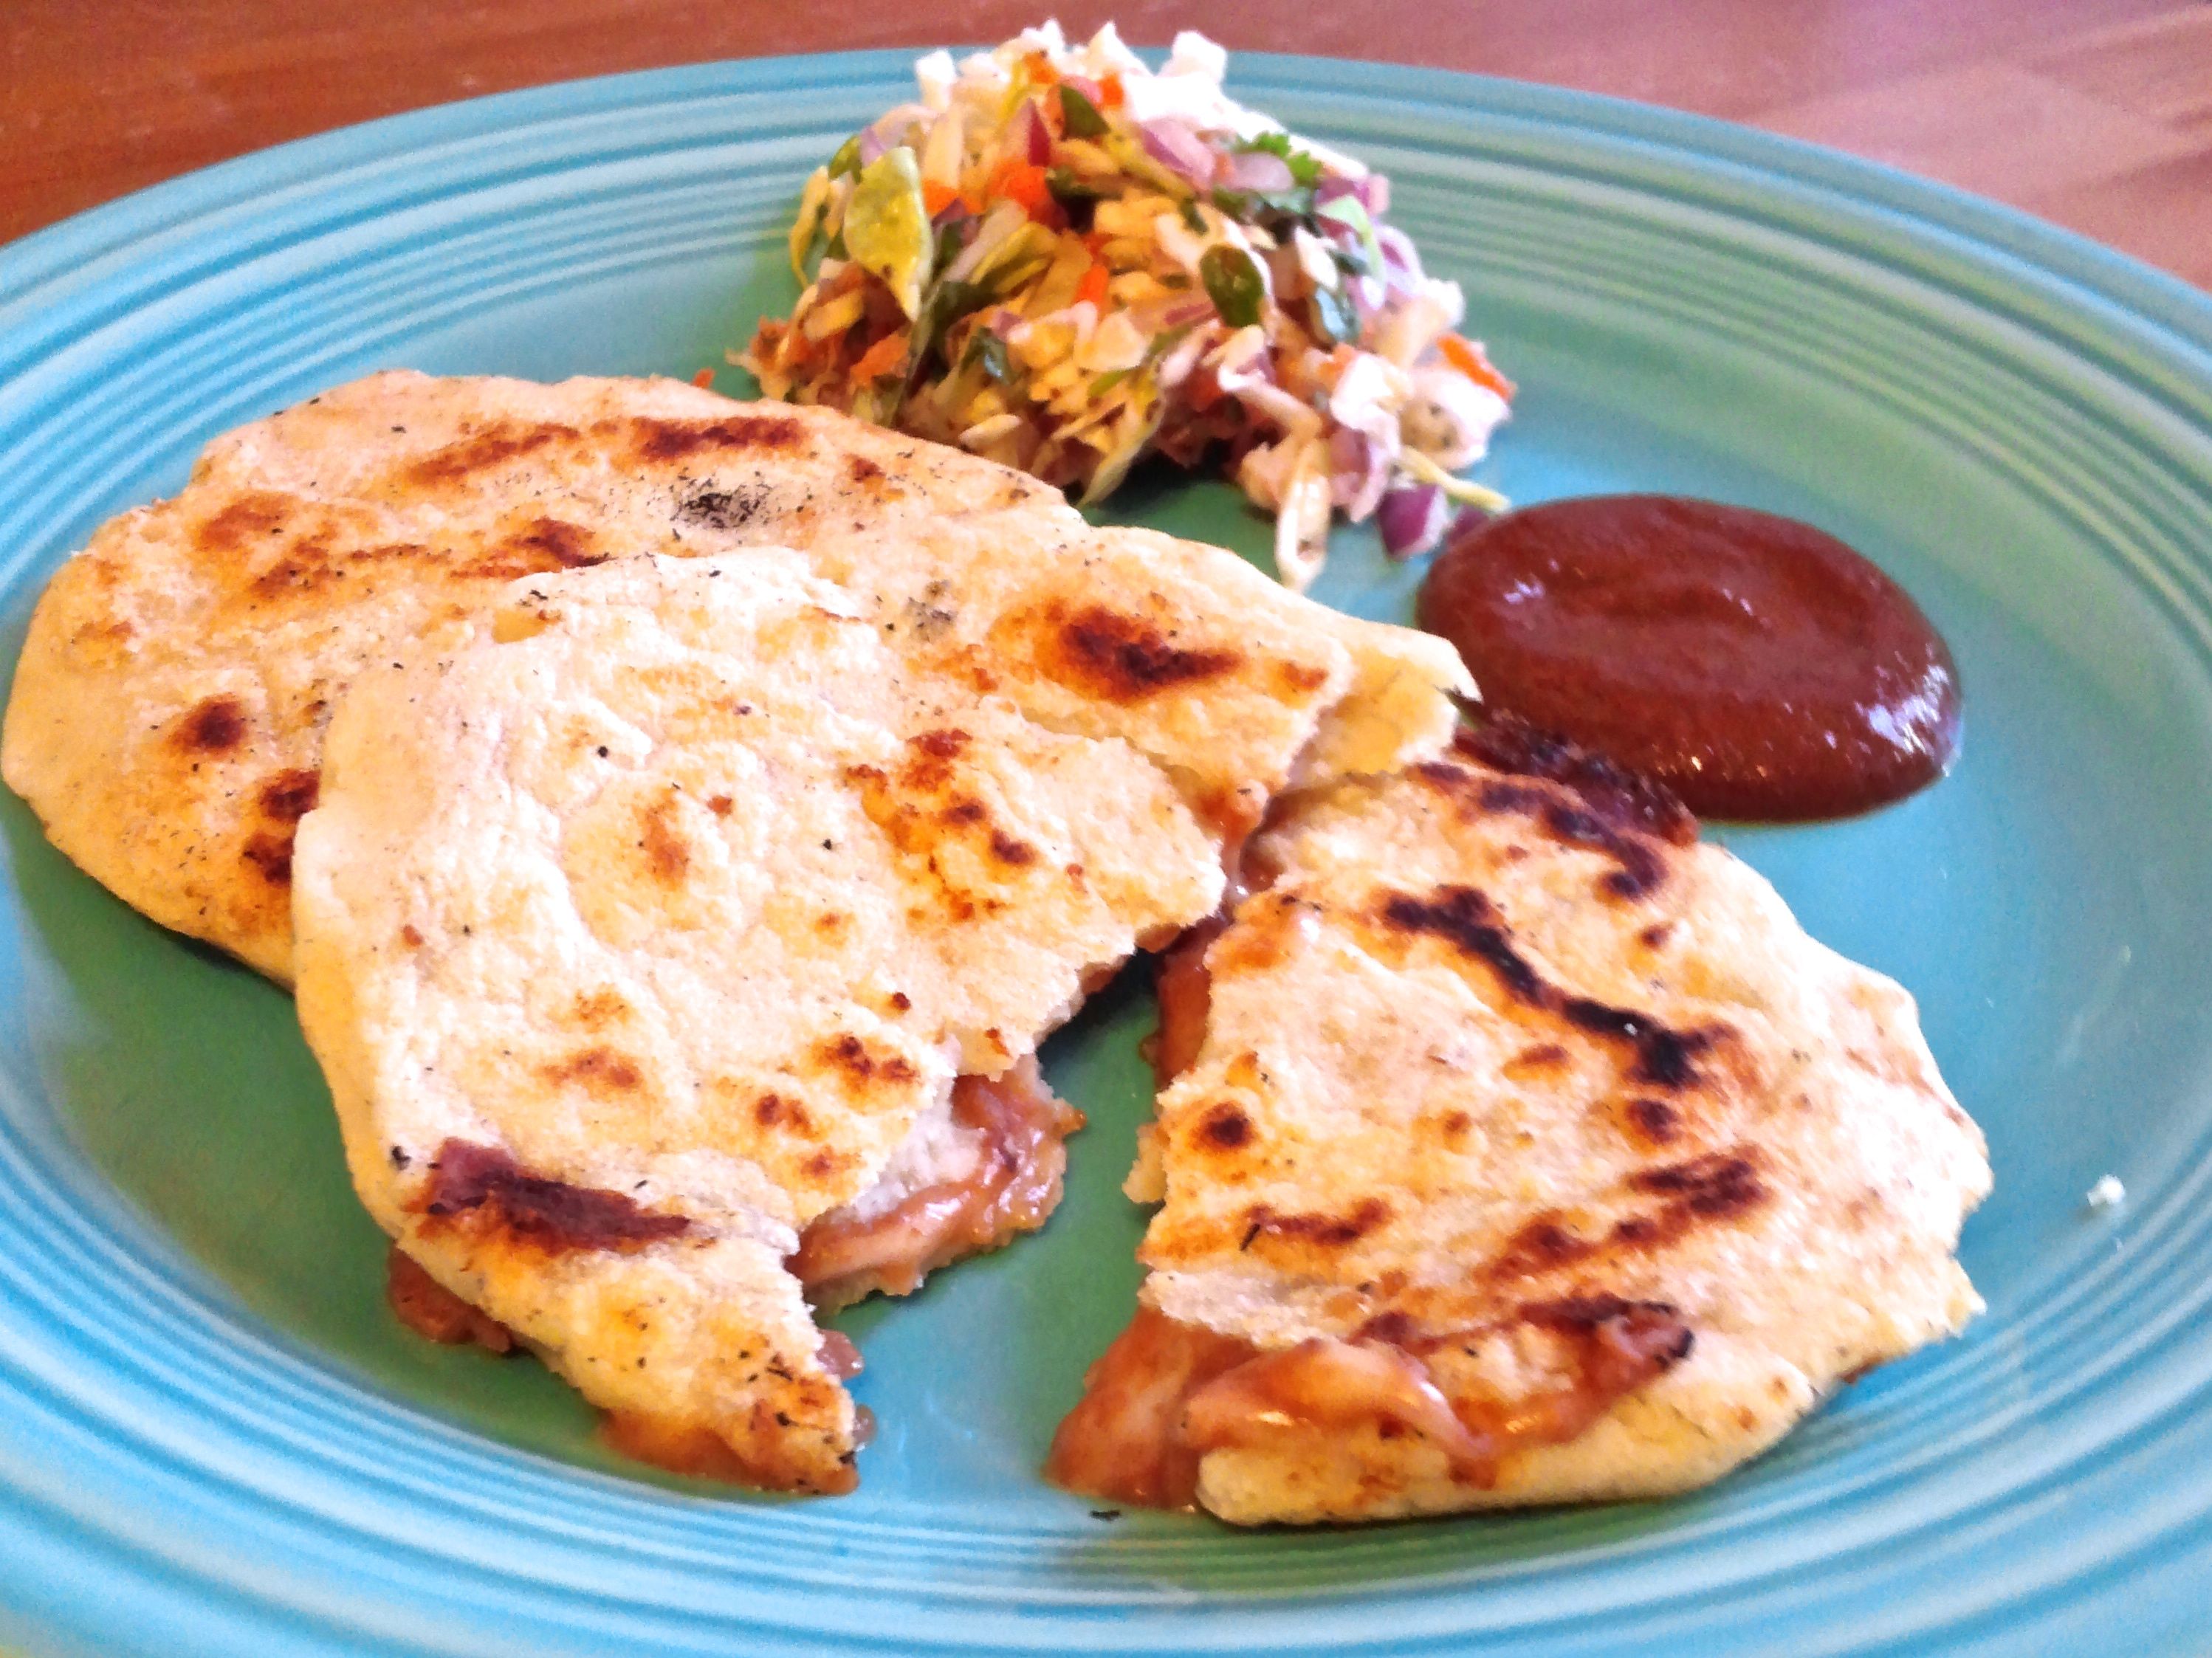 Pupusas with cabbage slaw and sauce.